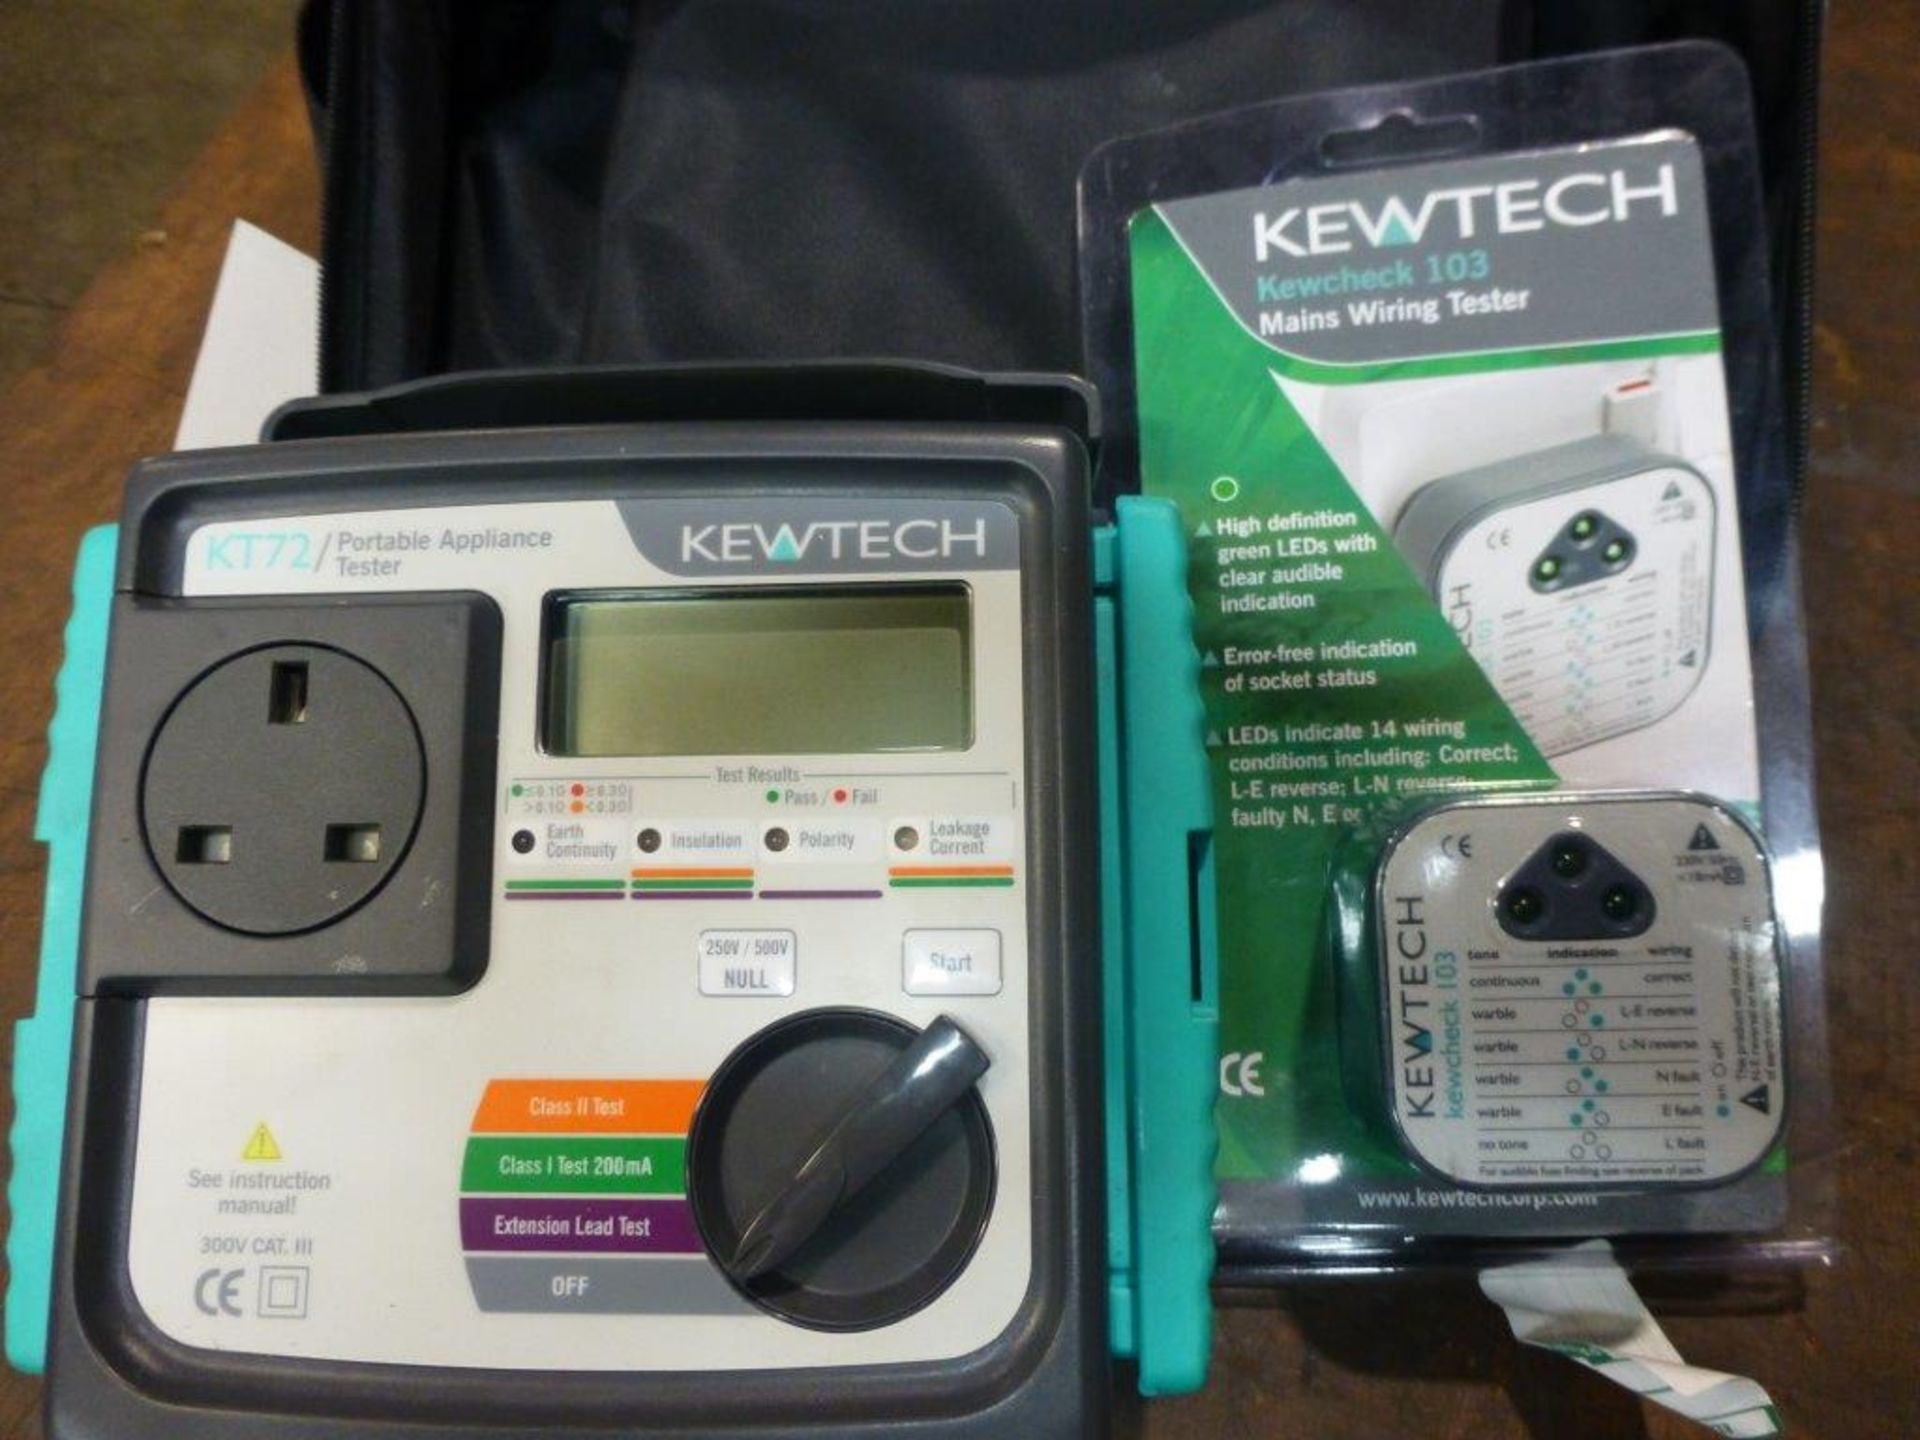 Kewtech KT72 portable appliance tester with leads and storage case